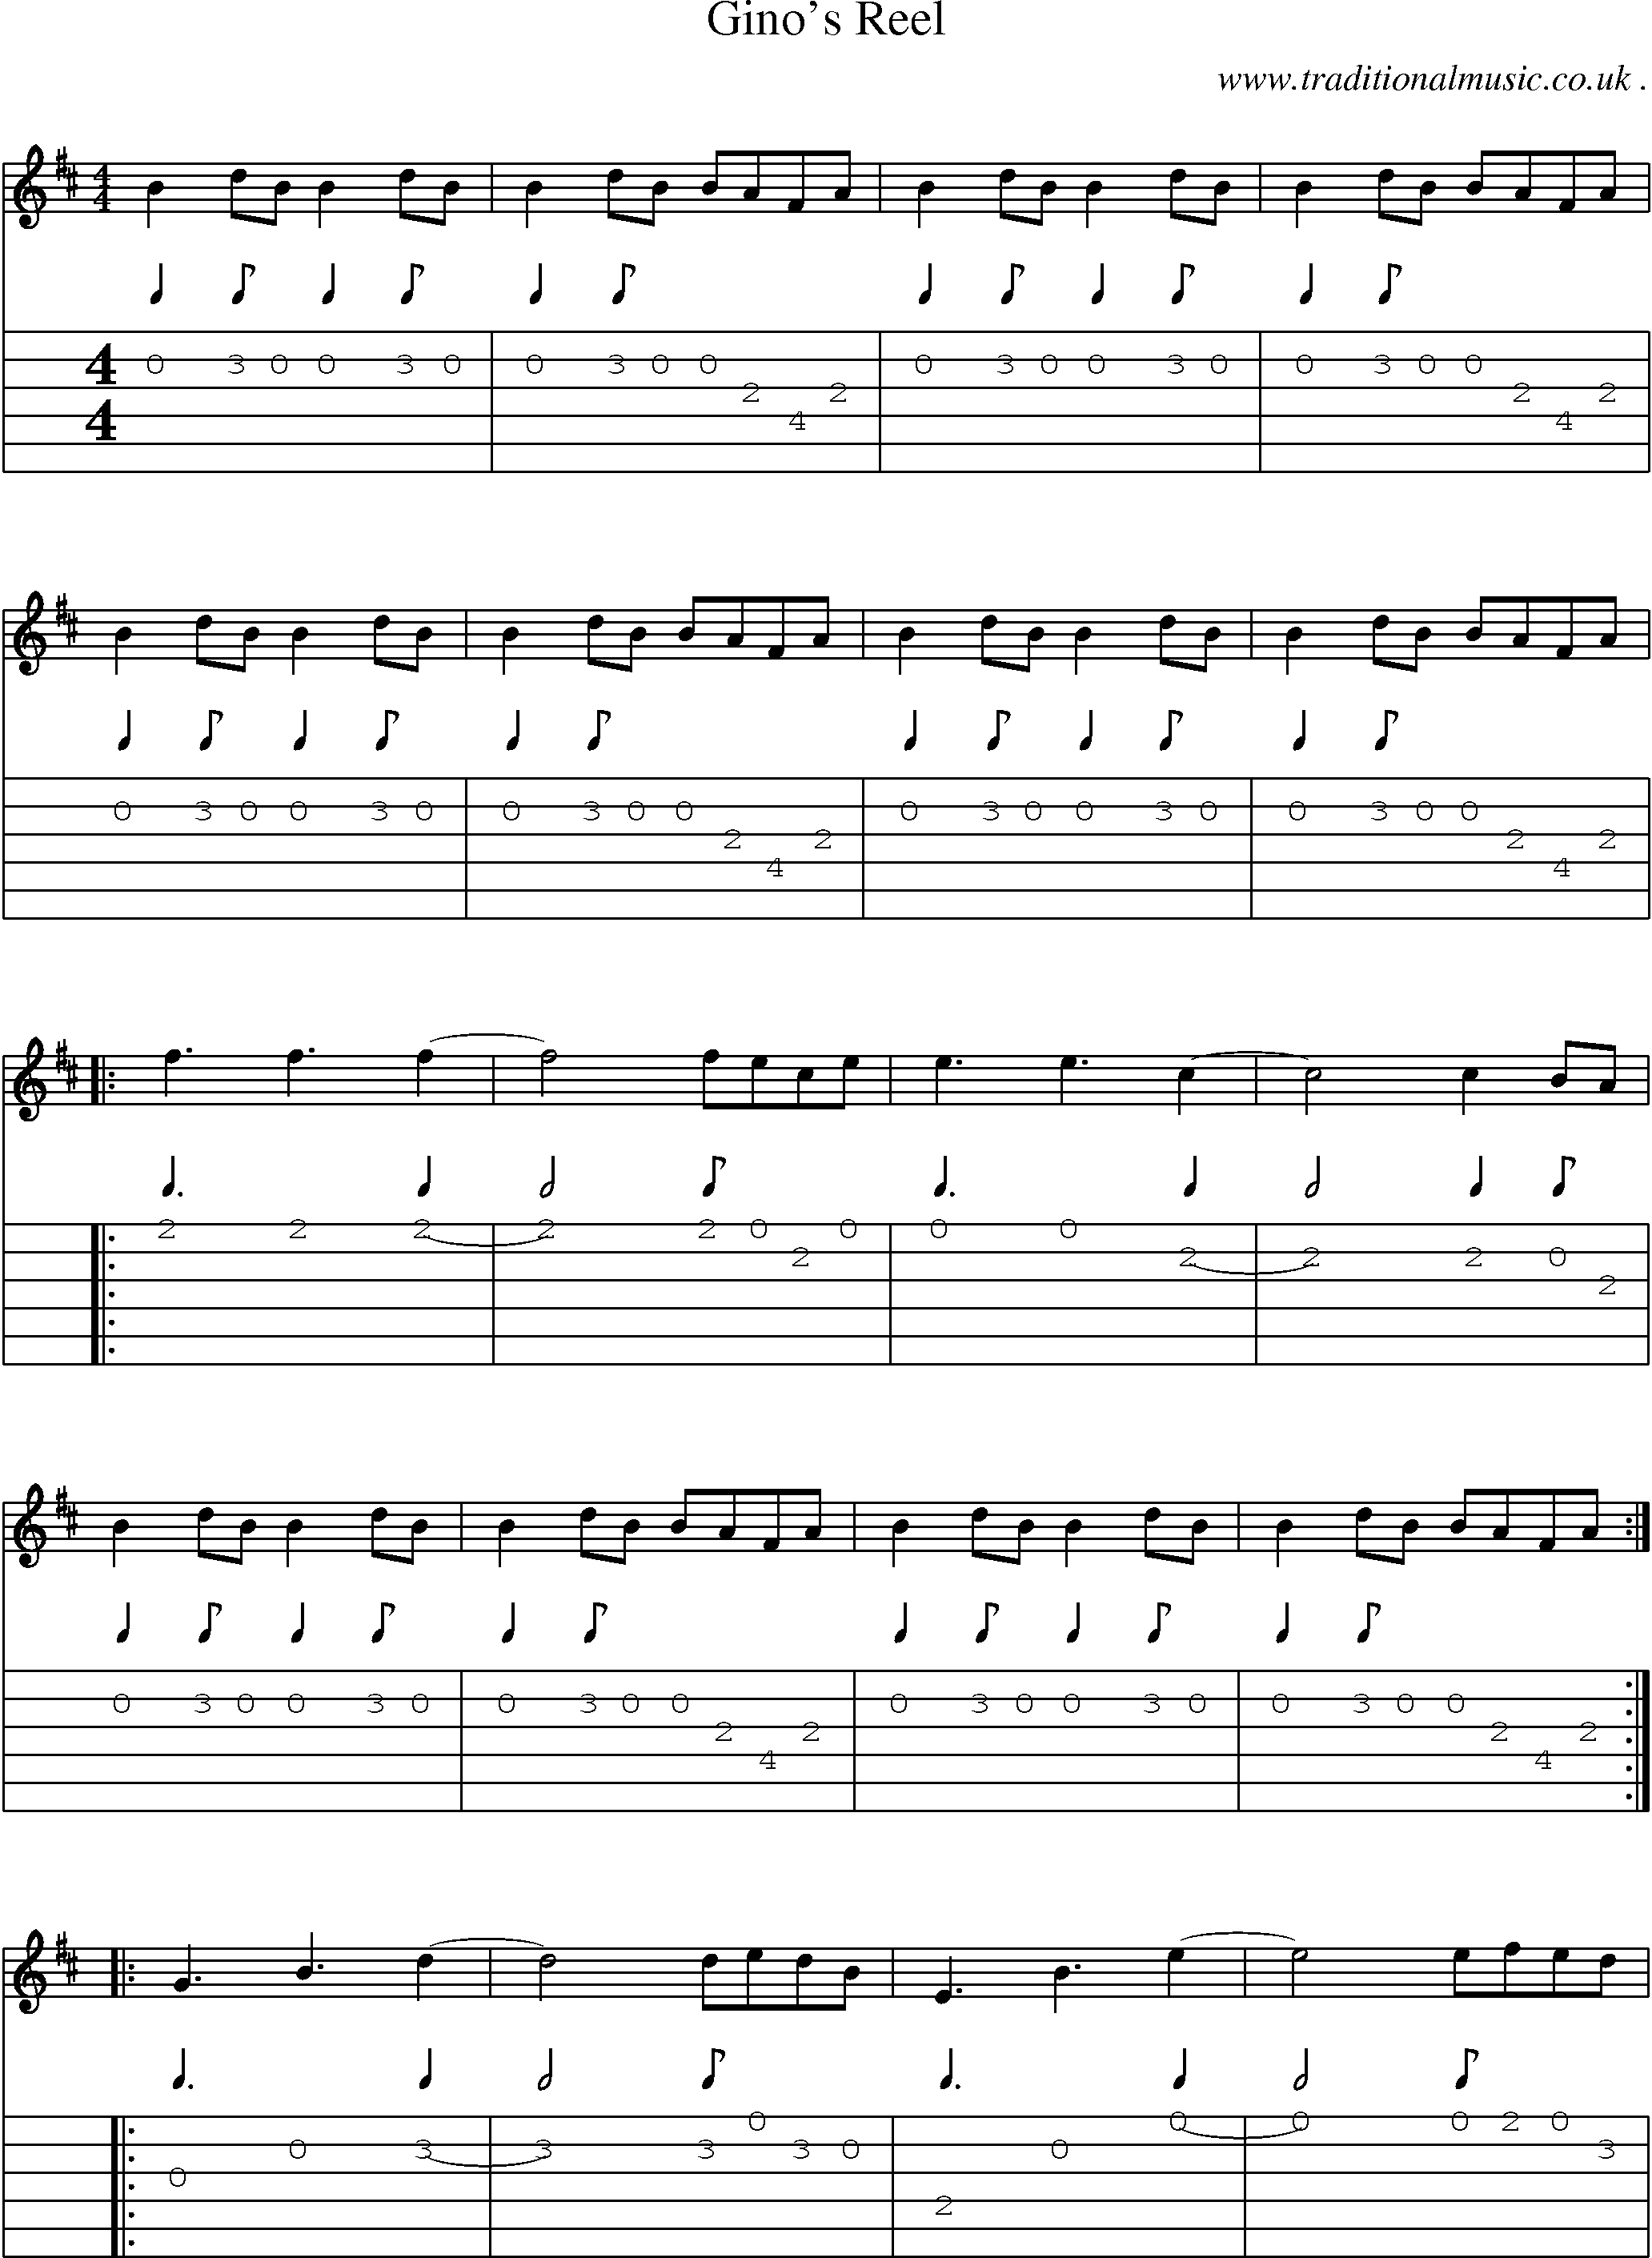 Sheet-Music and Guitar Tabs for Ginos Reel